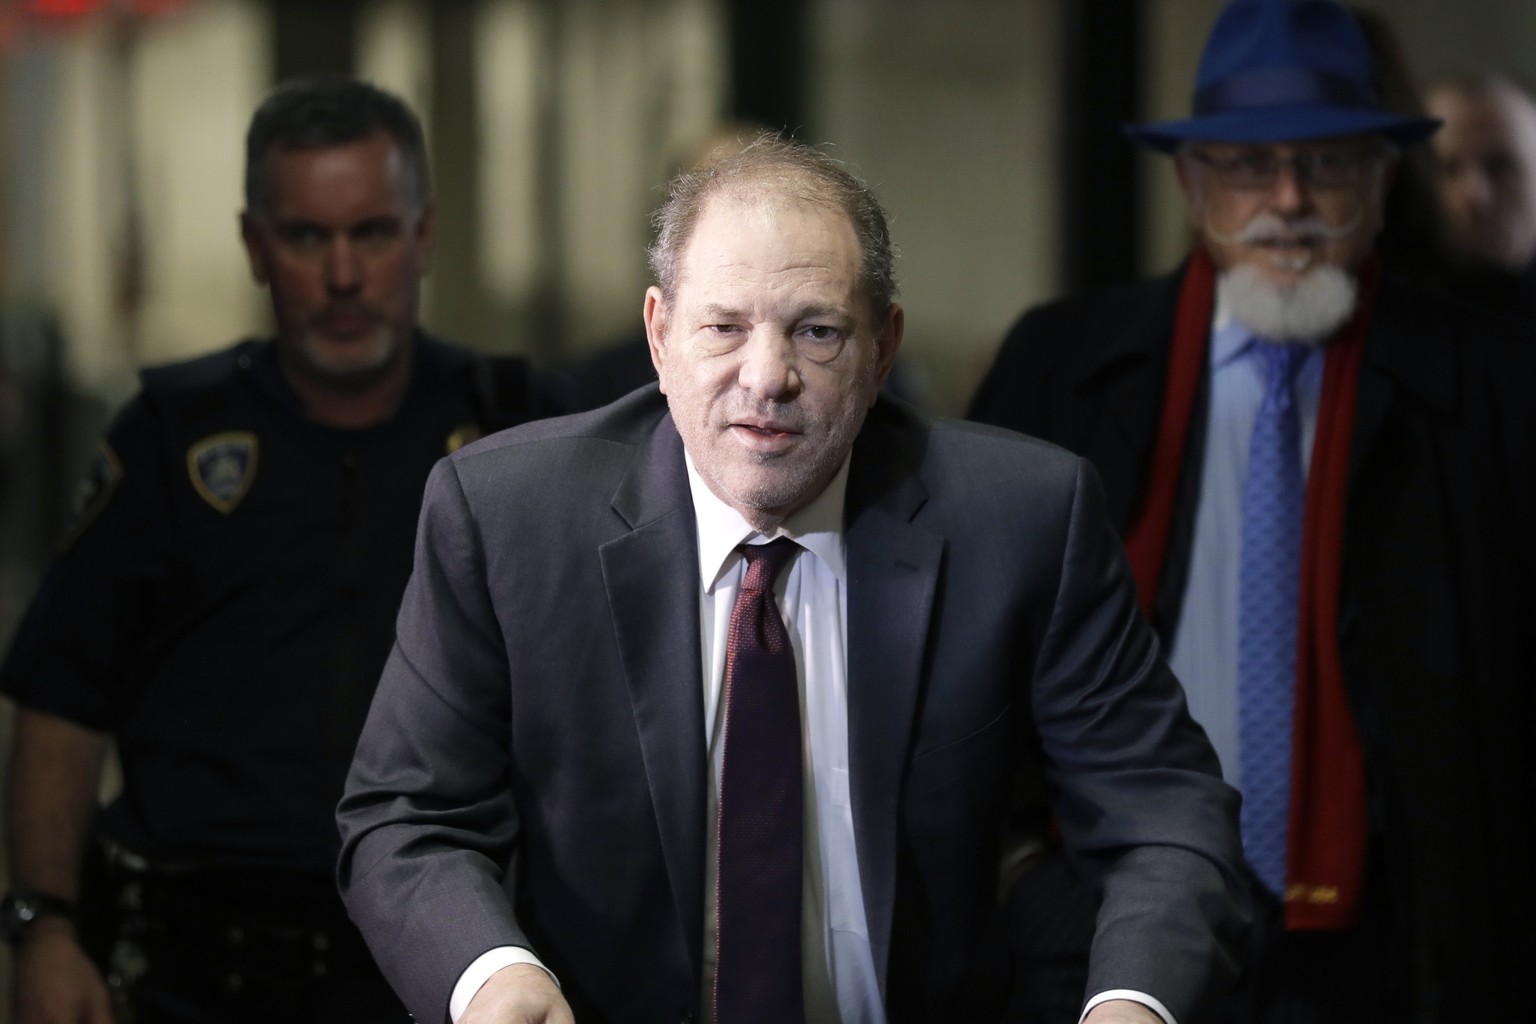 FILE - In this Feb. 20, 2020 file photo, Harvey Weinstein arrives at a Manhattan courthouse for his rape trial in New York. Weinstein was sentenced Wednesday, March 11, to 23 years in prison for rape  ...